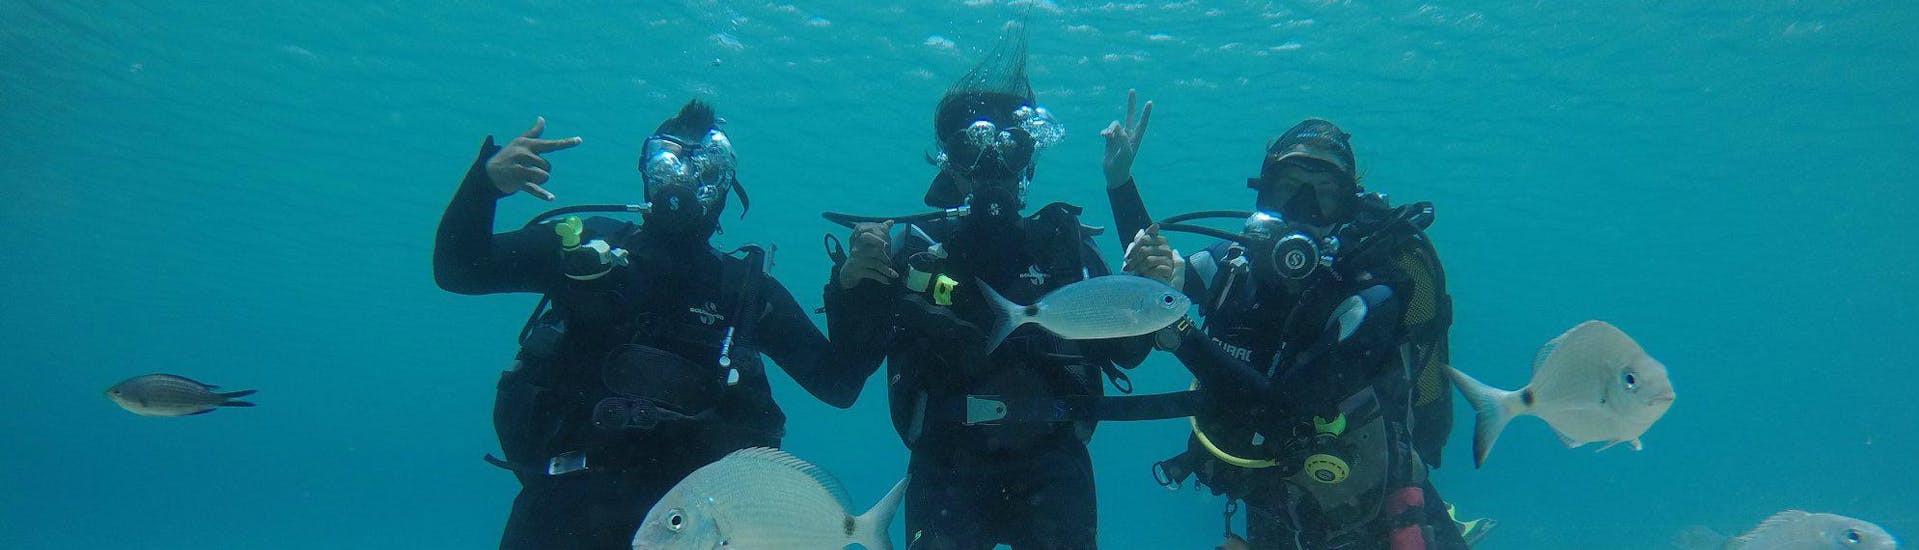 Three divers exploring the fascinating underwater world of the Aegean Sea on their Scuba Diving Course for Beginners - PADI Scuba Diver together with an experienced instructor from the Mykonos Diving Center.